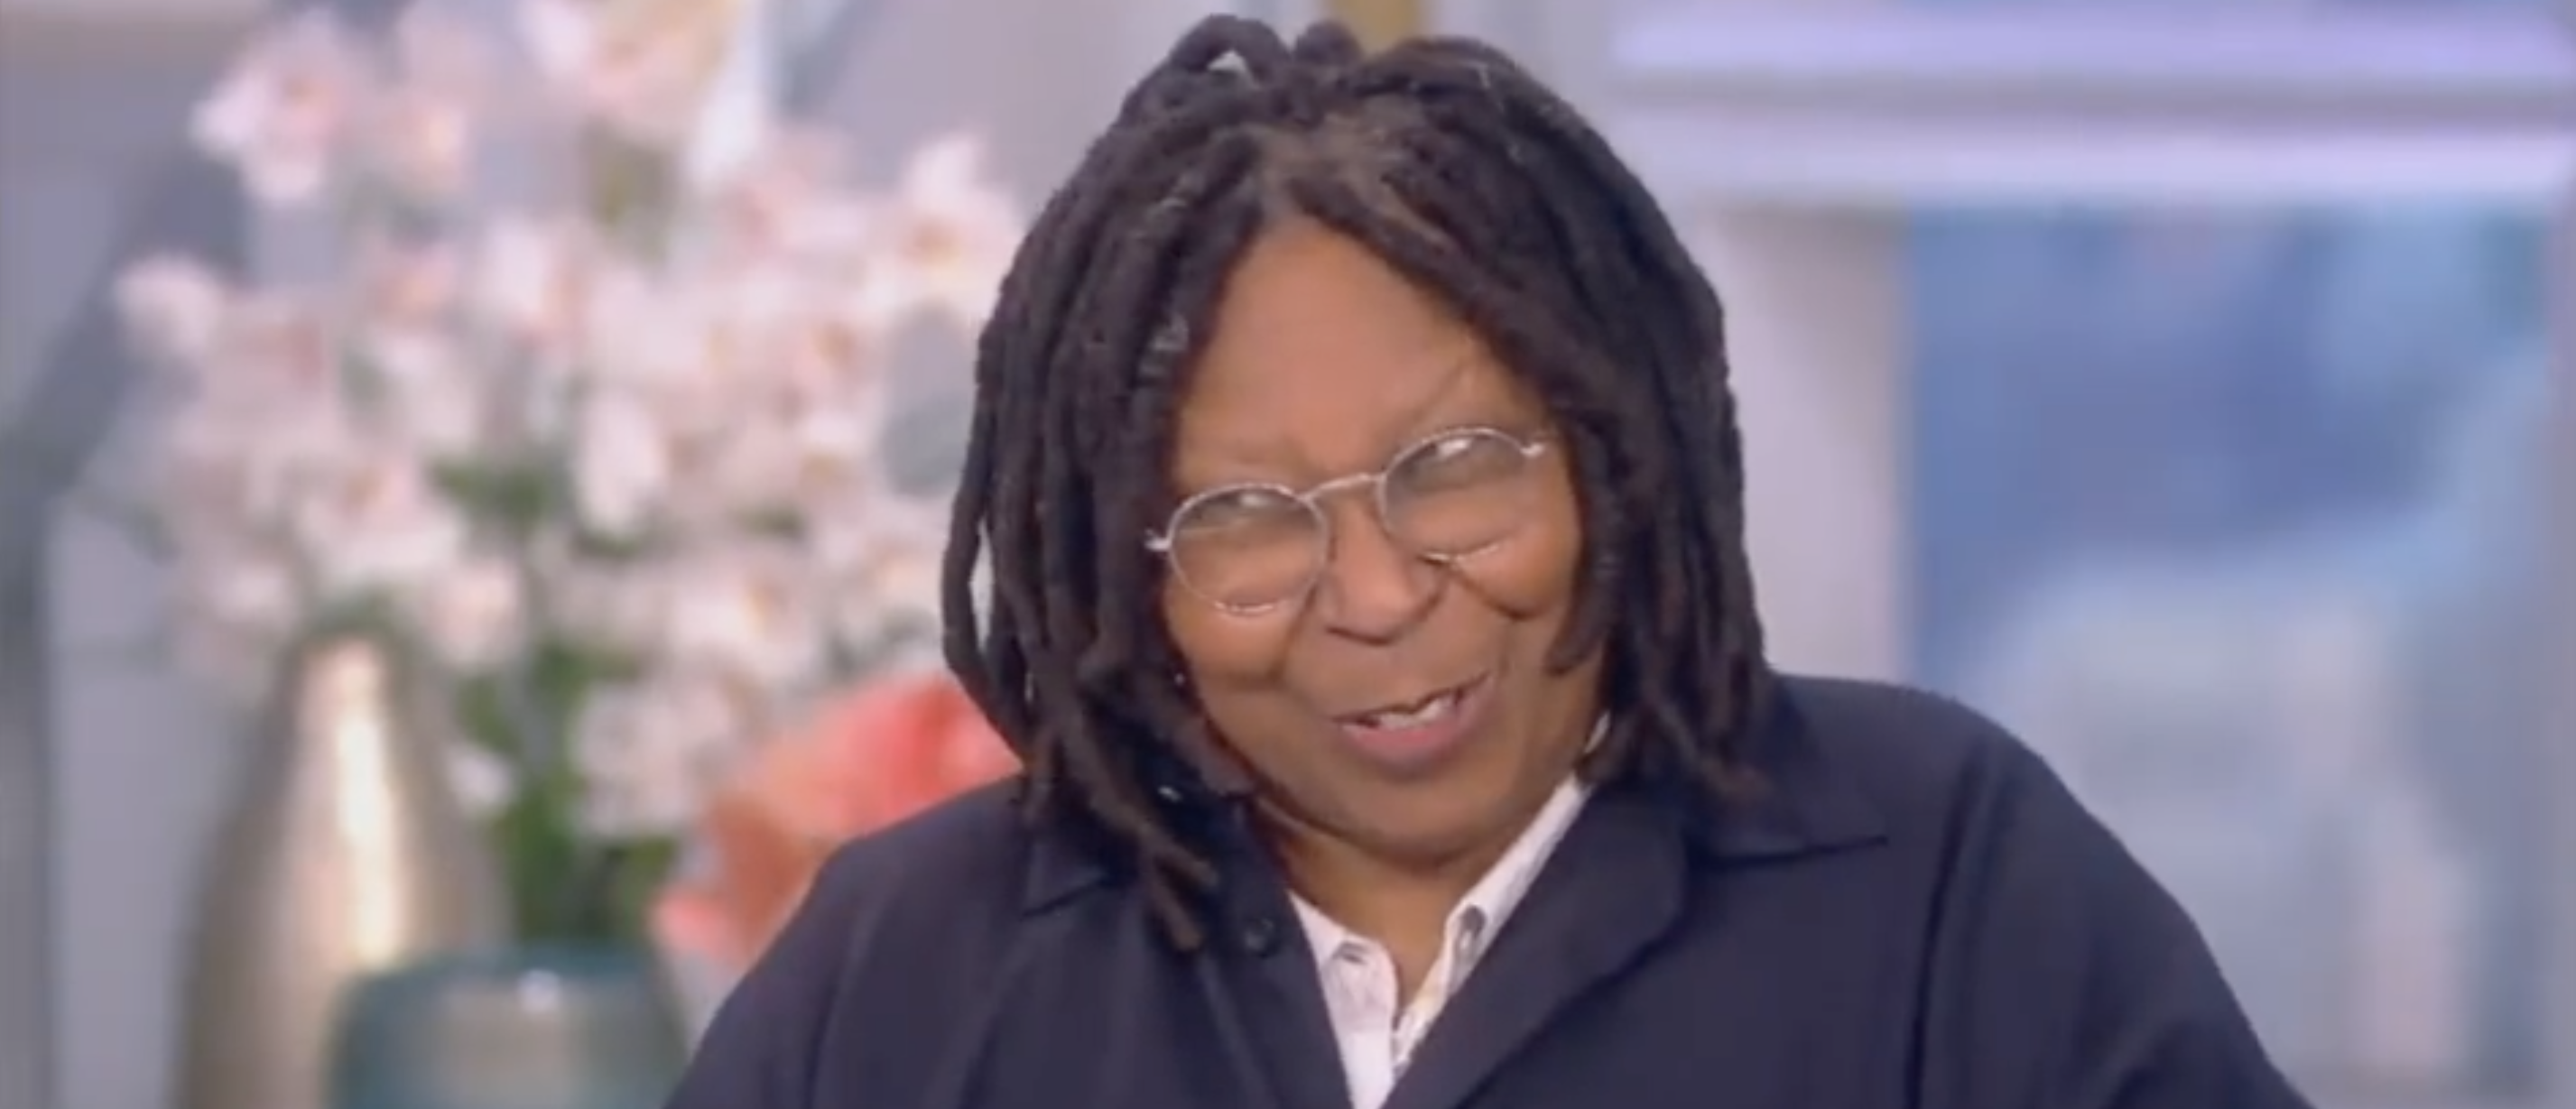 ‘The View’ Hosts Parrot Lie About Sarah Palin From SNL Skit